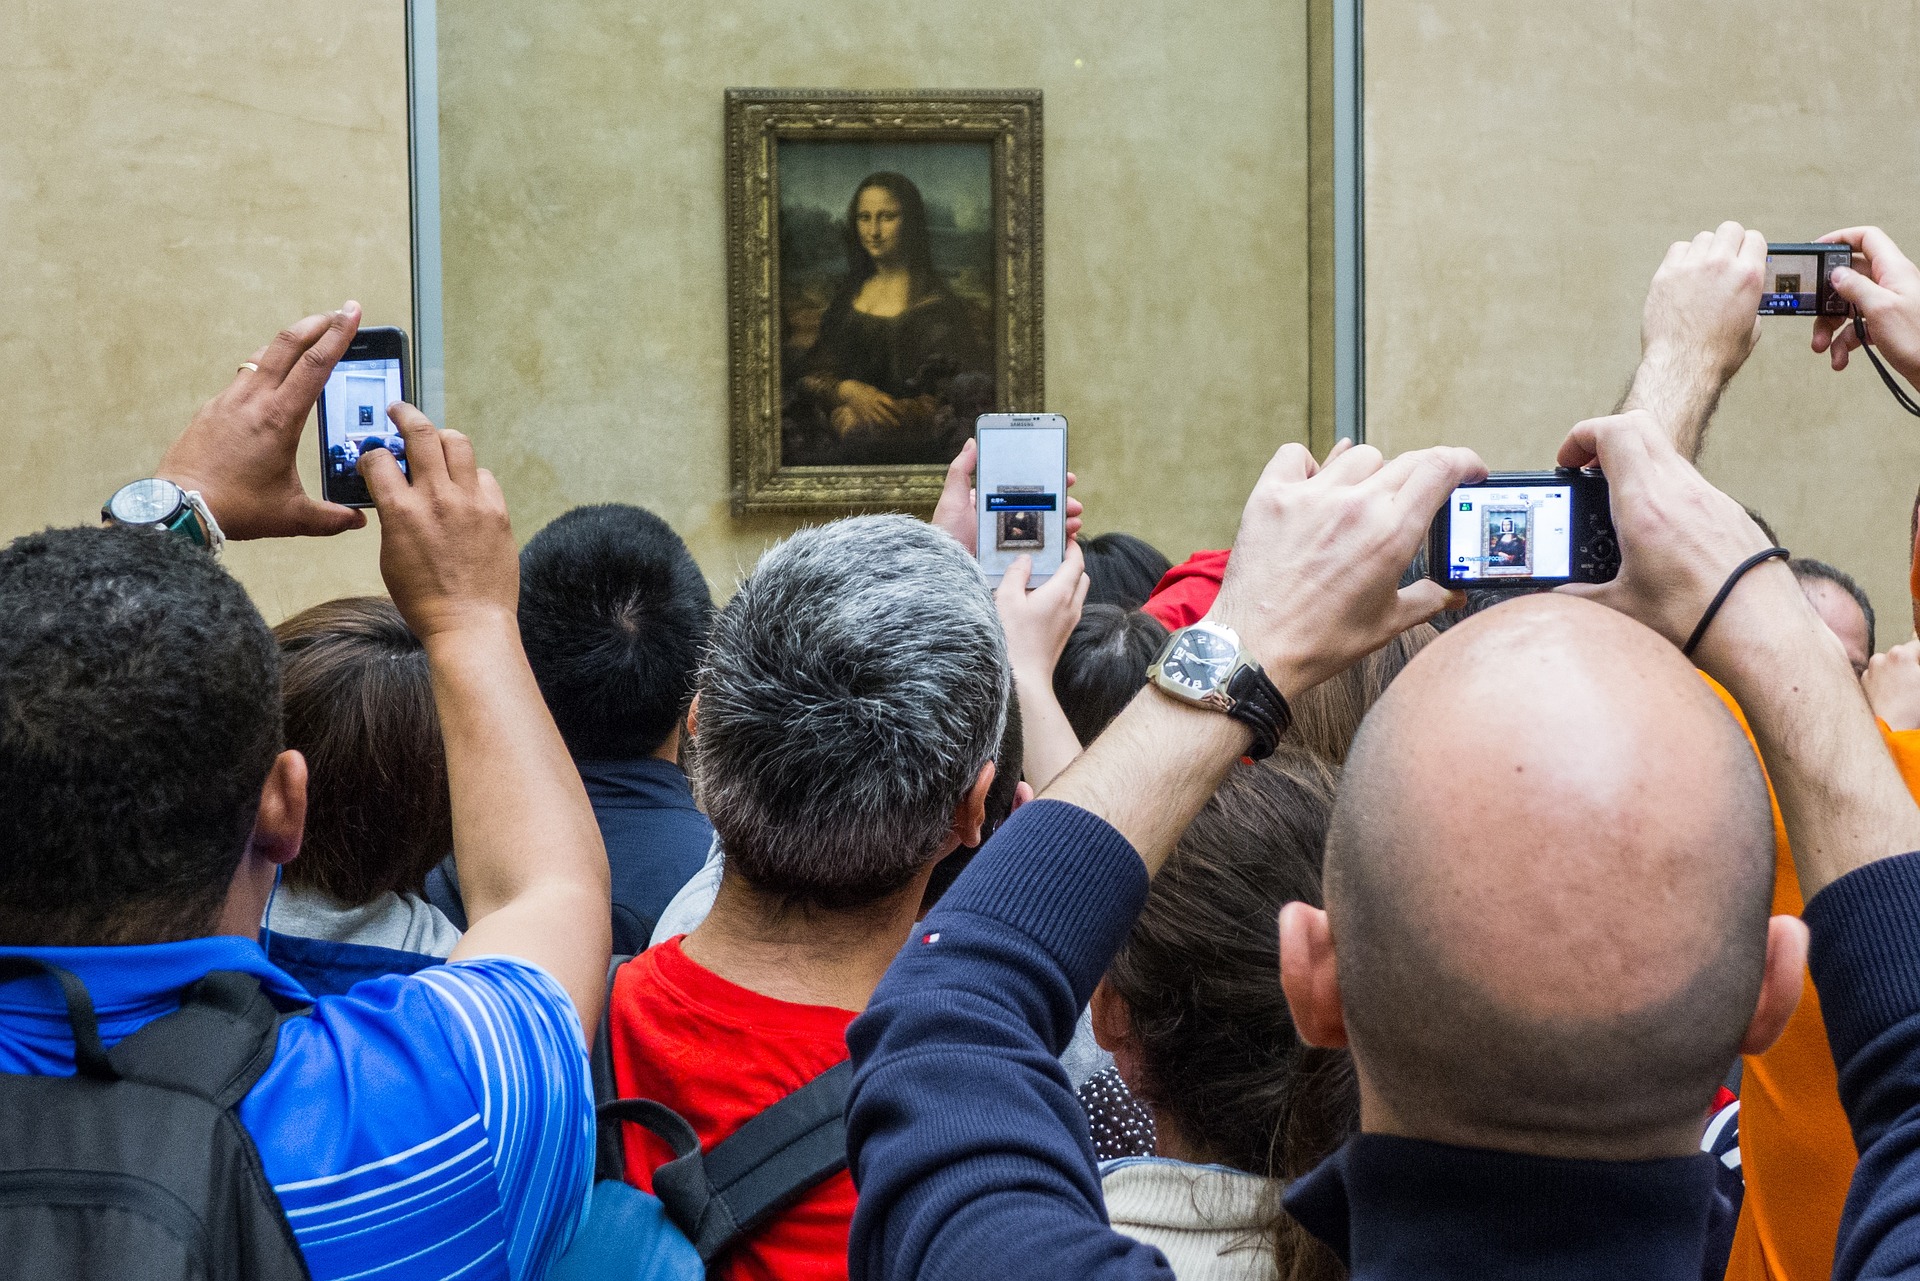 Crowds taking photos of Mona Lisa at the Louvre, Paris